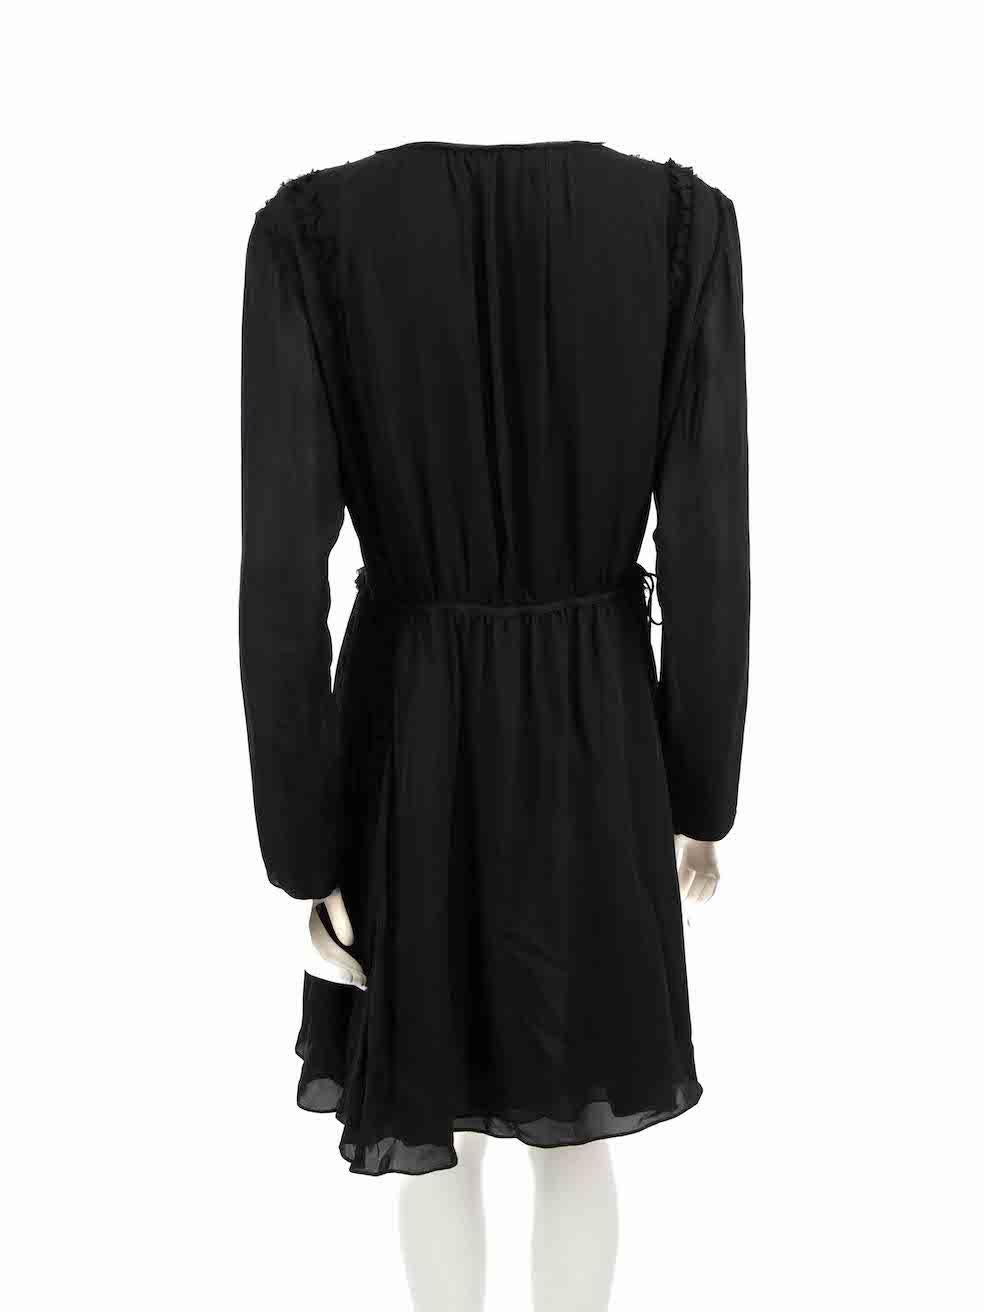 Jason Wu Black Silk Ruffle Trimmed Dress Size XXL In Good Condition For Sale In London, GB